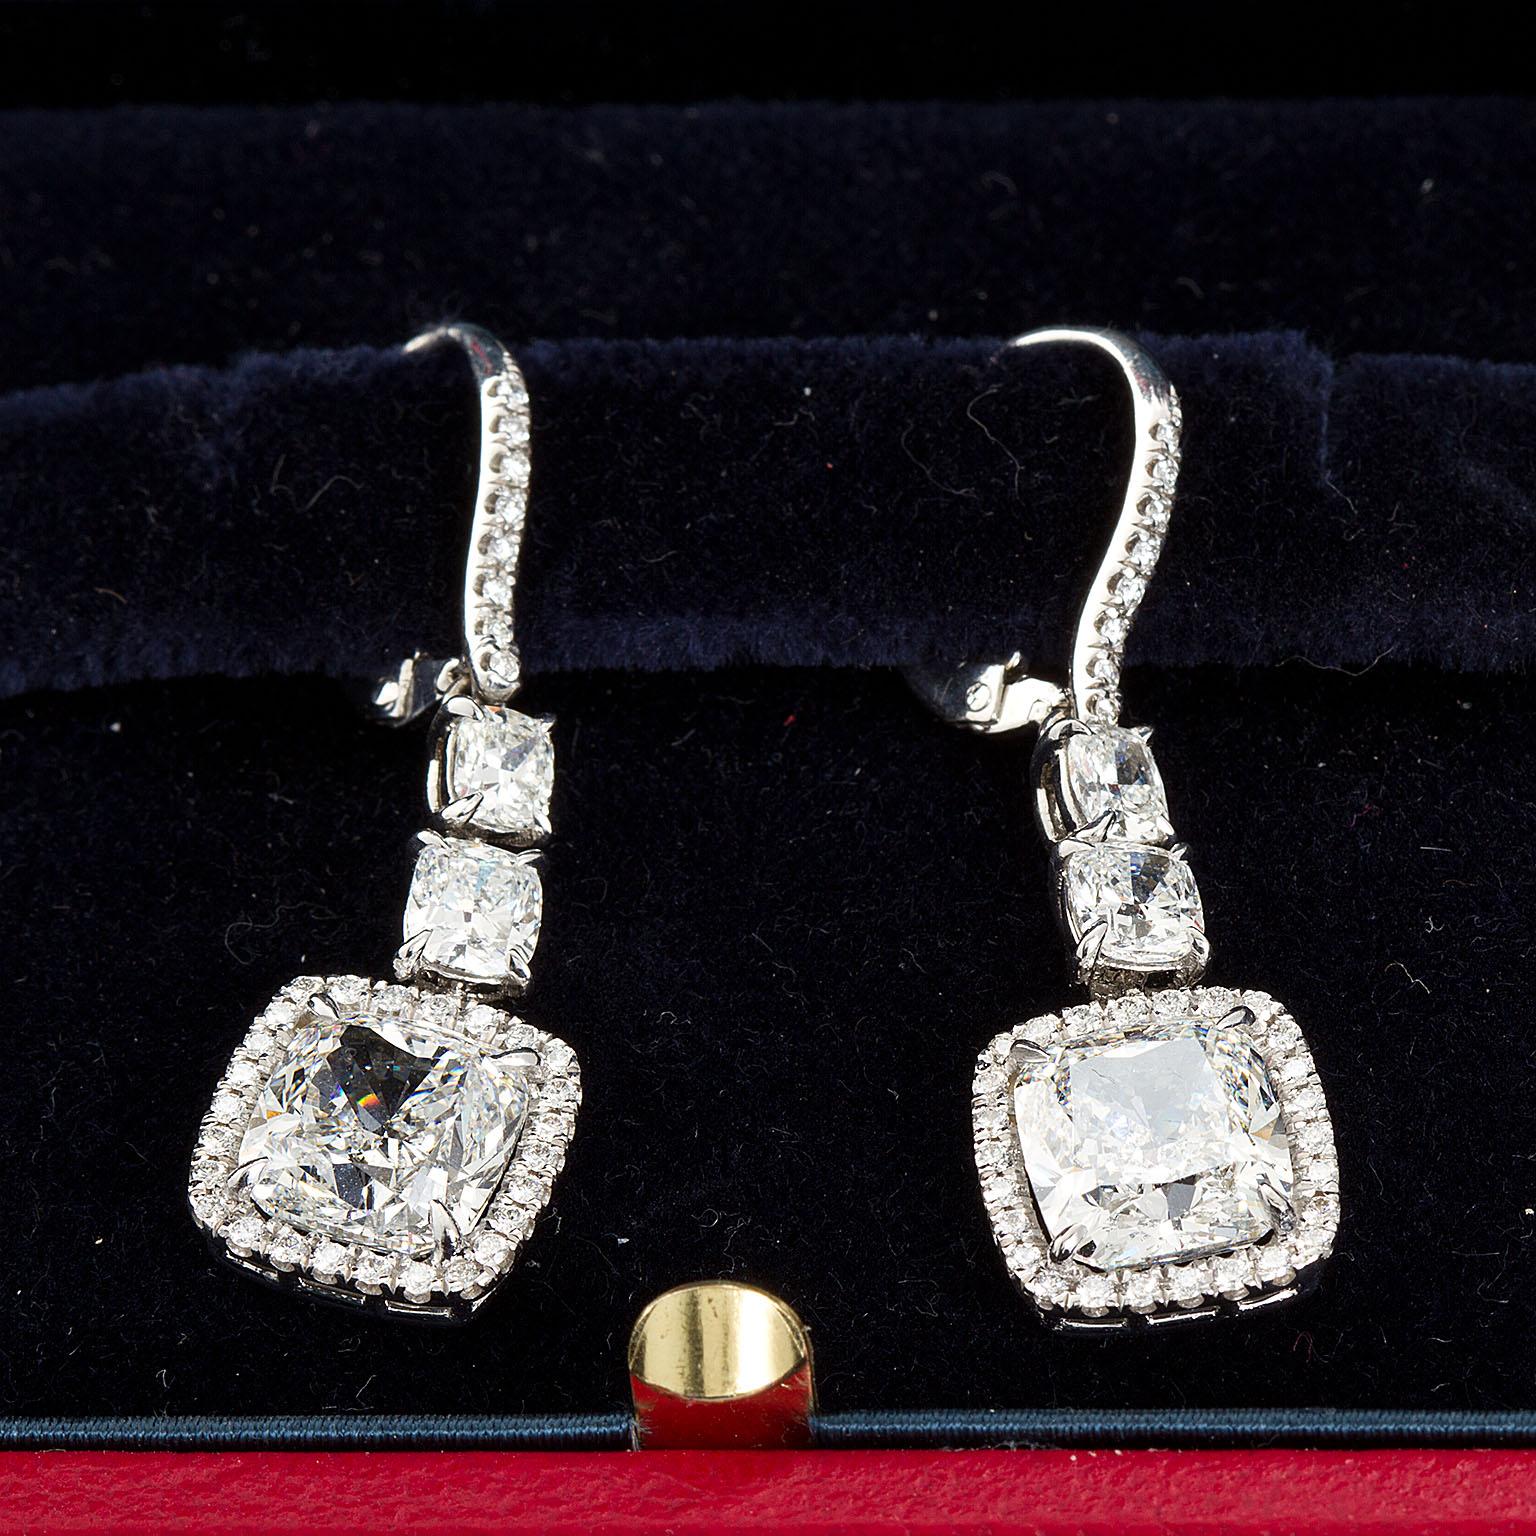 Pair of fine diamond dangle earrings set with a 4.00 carat each Cushion shape diamond, suspended from platinum gooseneck leverbacks and two (each) graduated Cushion shape diamonds.
Main diamonds are 4.02 ct. G color VS1 clarity and 4.01 carat F